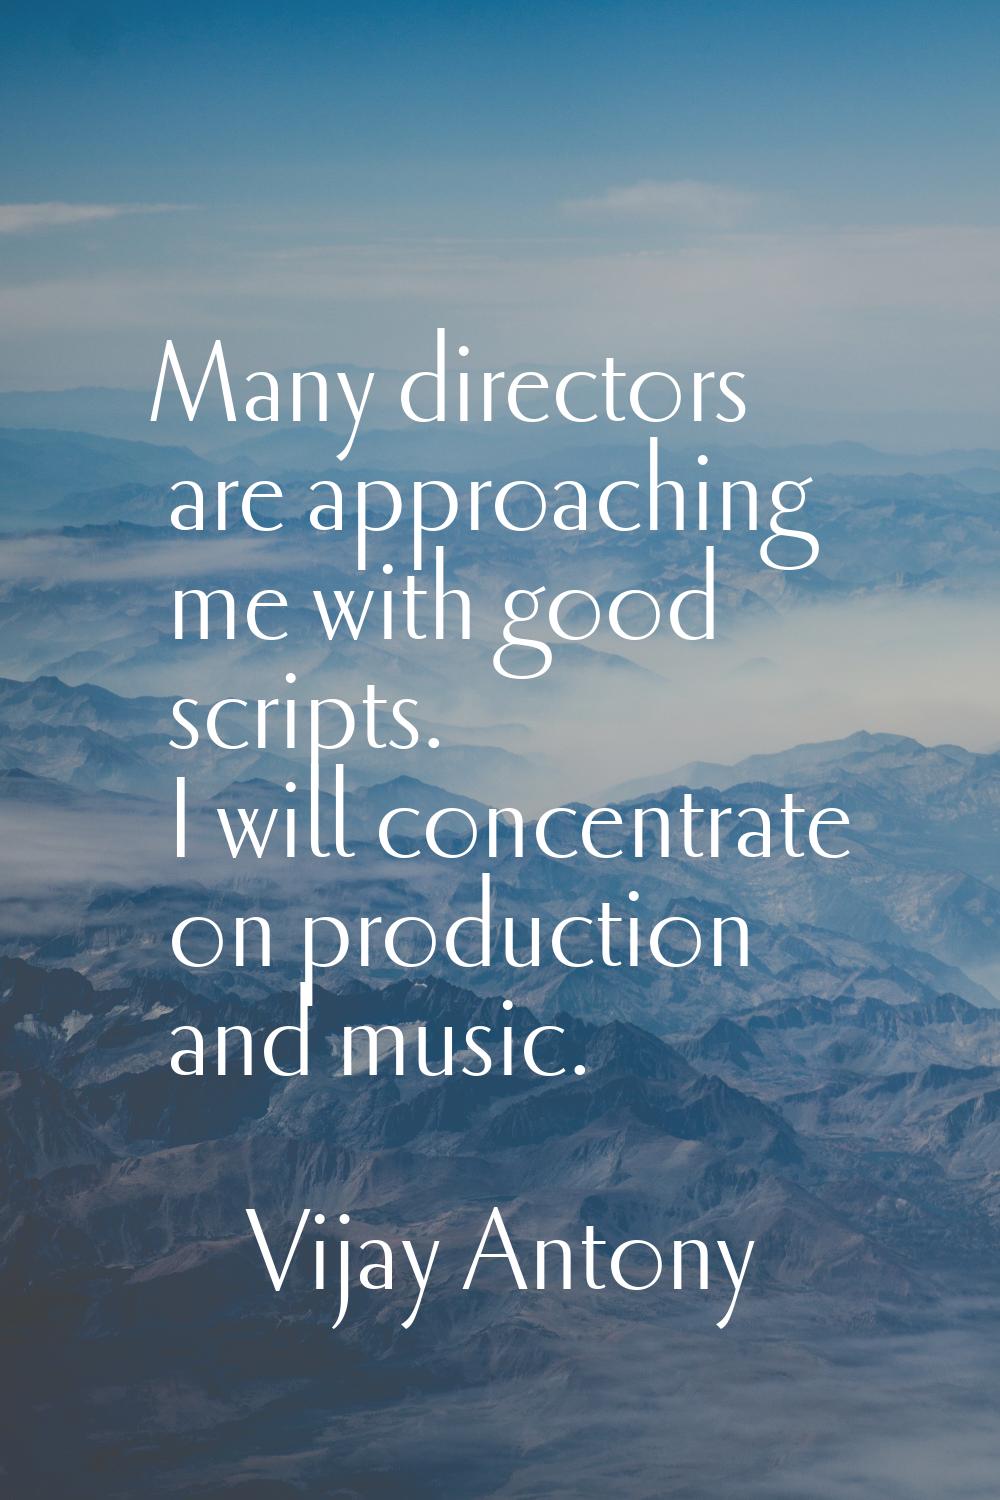 Many directors are approaching me with good scripts. I will concentrate on production and music.